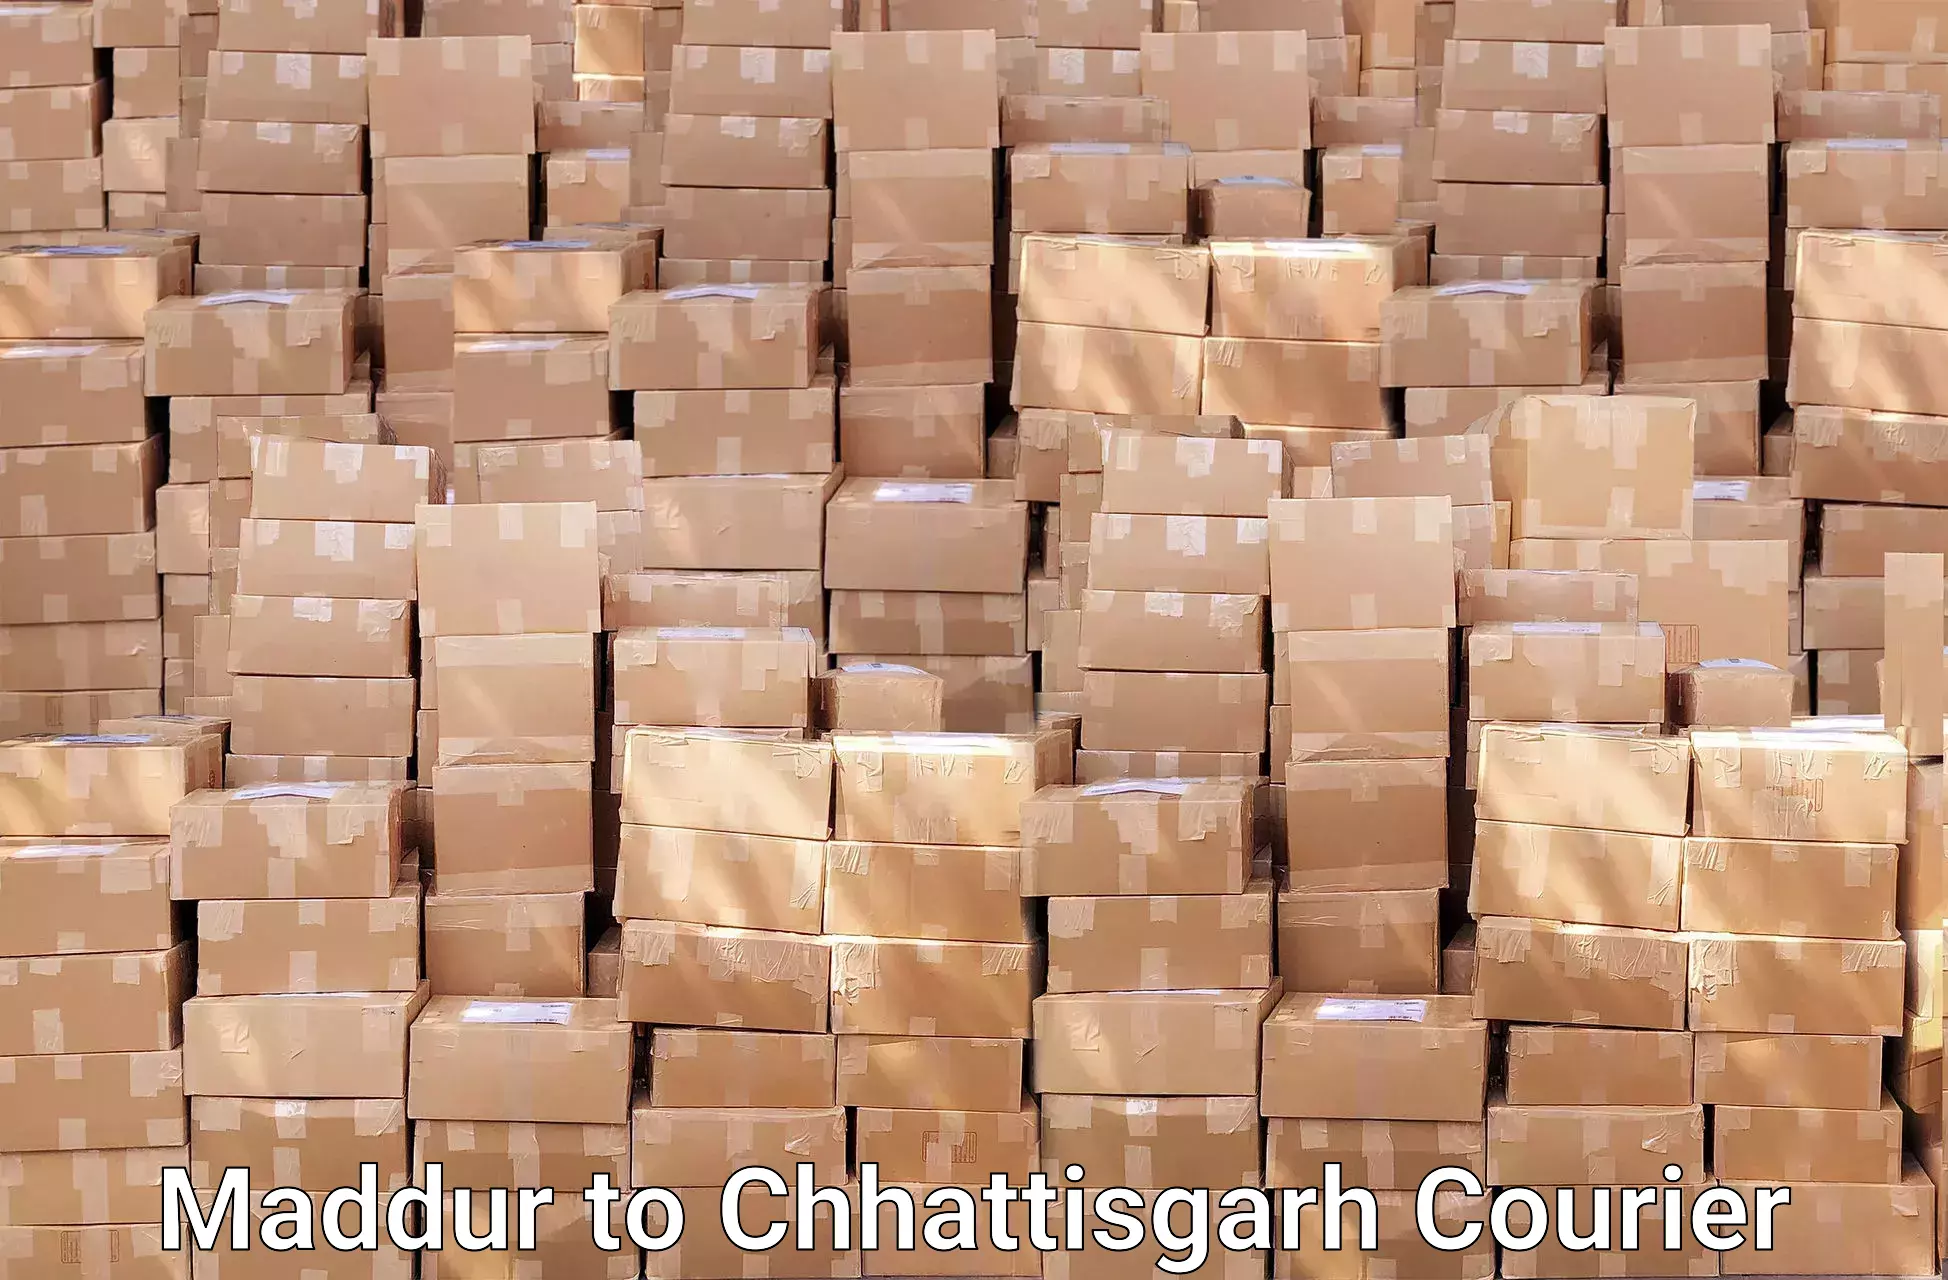 Quality moving and storage in Maddur to Bastar